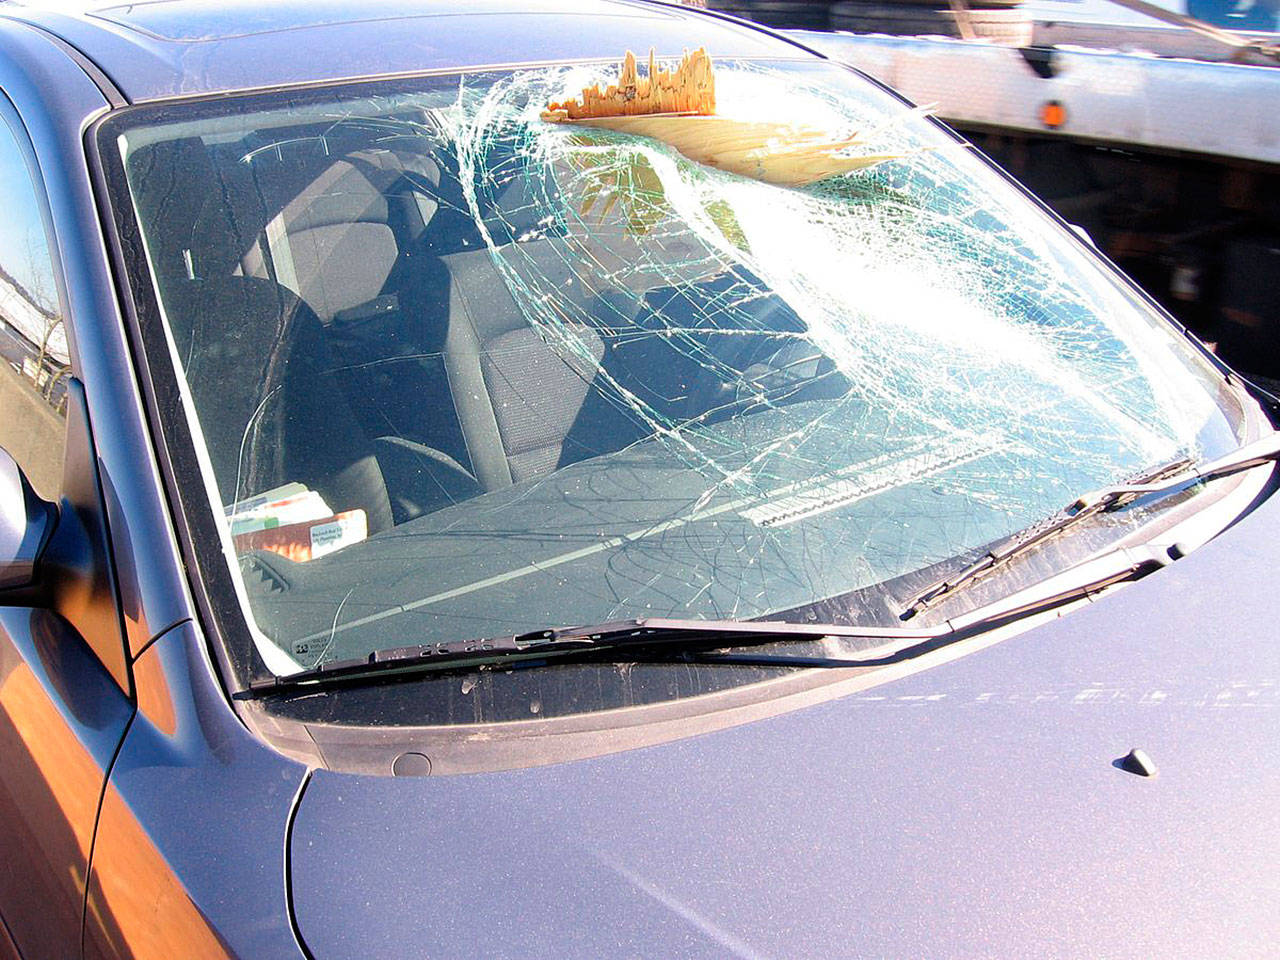 A driver suffered only minor scratches from glass splinters after a piece of lumber from an unsecured load went through the vehicle’s windshield around noon Tuesday along Highway 167 southbound in Kent near the 84th Avenue South exit. The driver of the vehicle that lost the lumber did not stop. COURTESY PHOTO, State Patrol